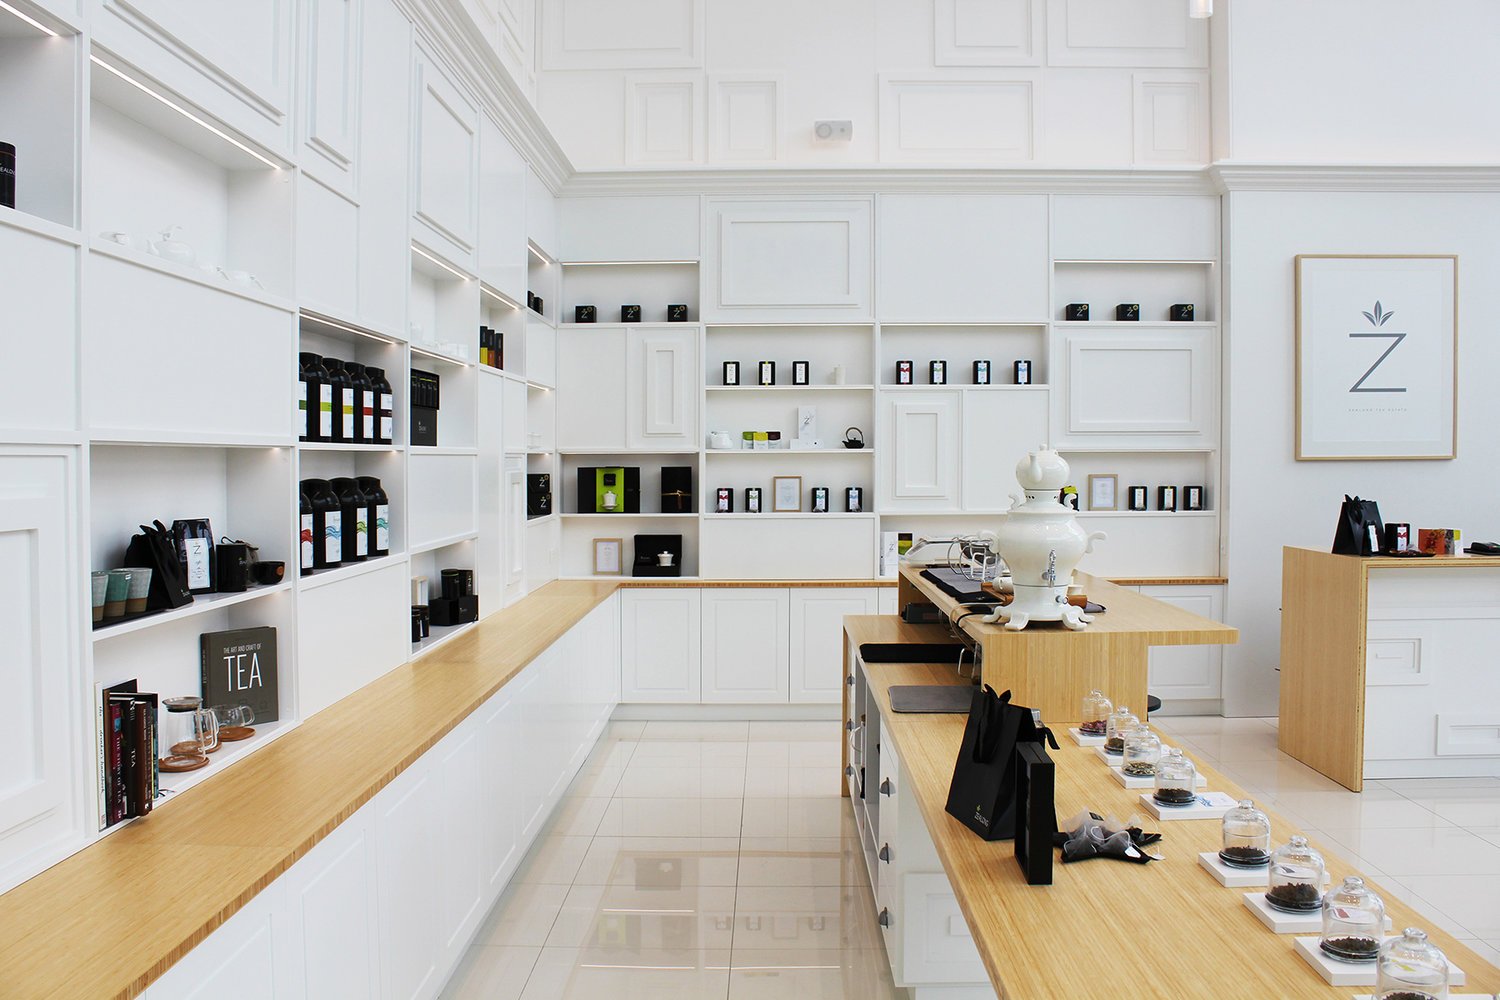 Custom black, white and natural wood retail fit out for the Zealong Tea Estate Retail store